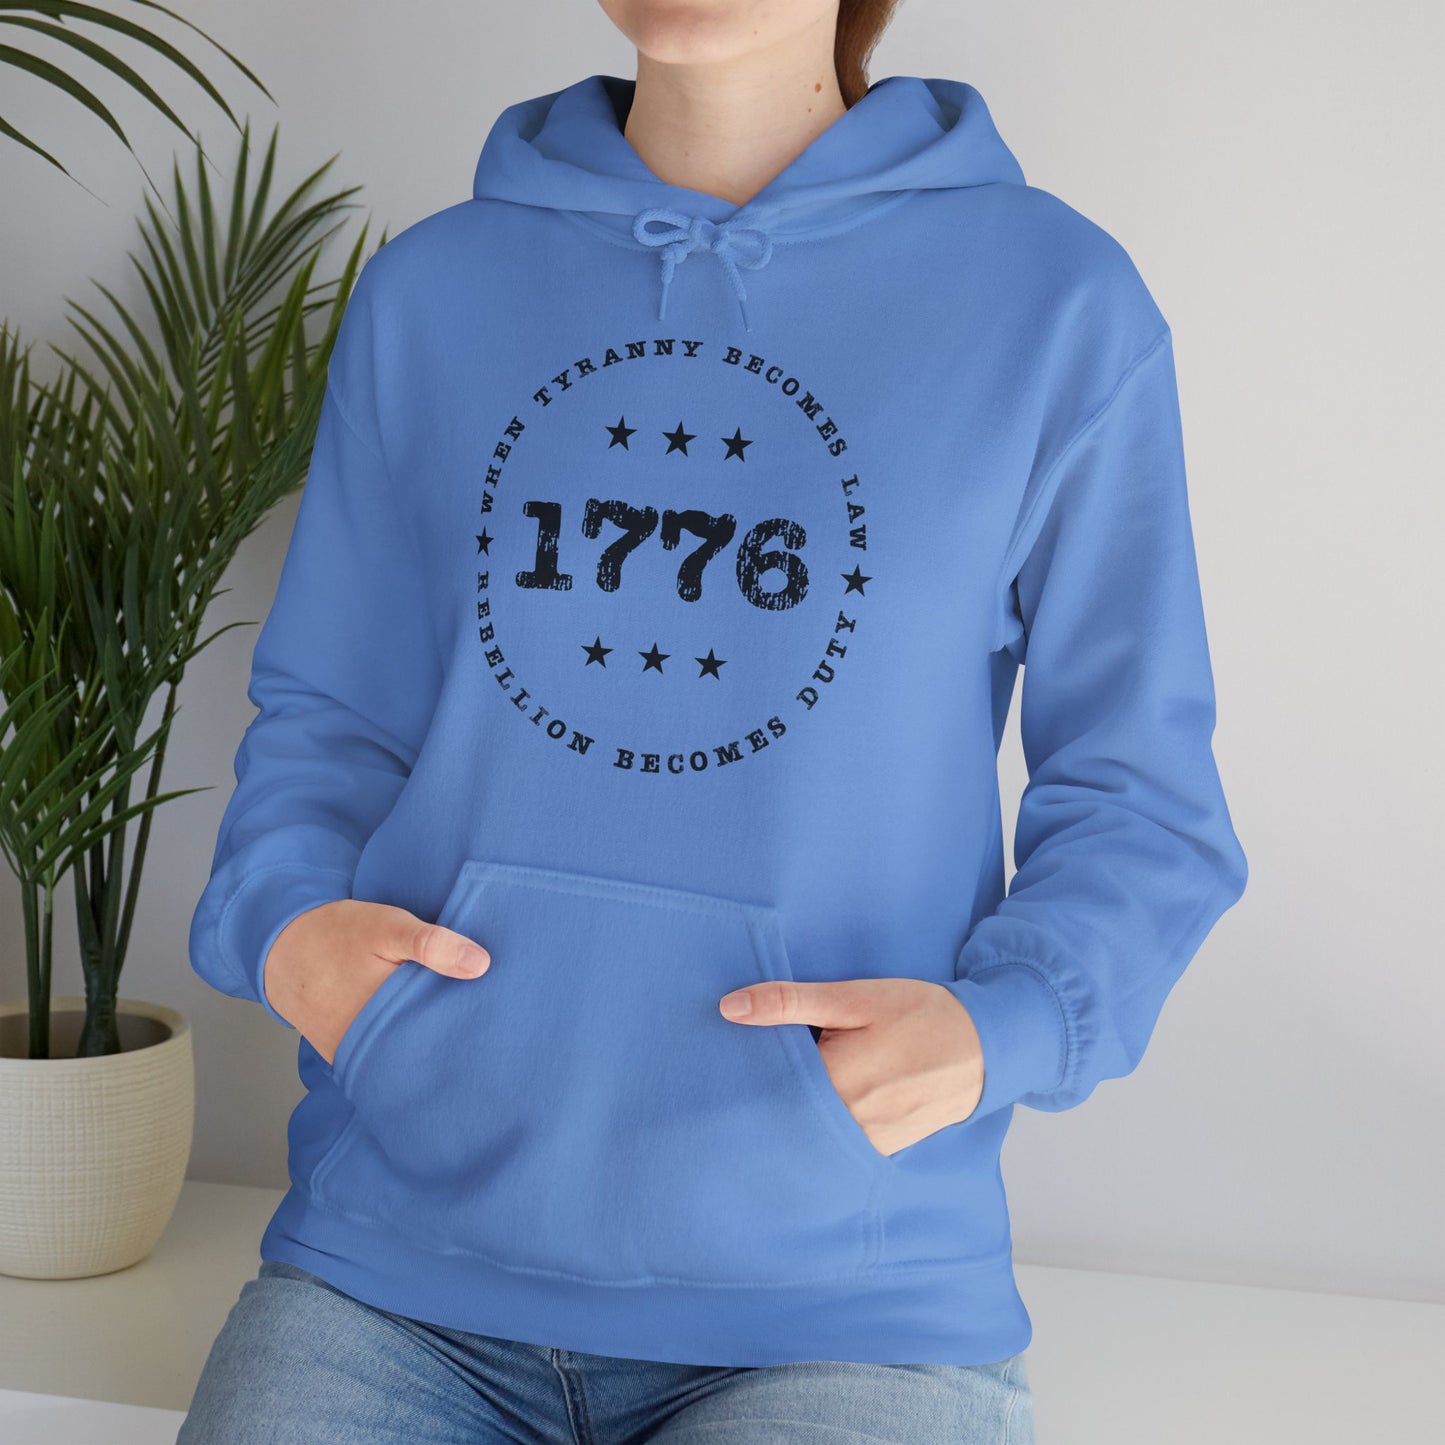 1776 Hooded Sweatshirt For Tyranny Hoodie For Rebellion Clothing For Conservative Gift